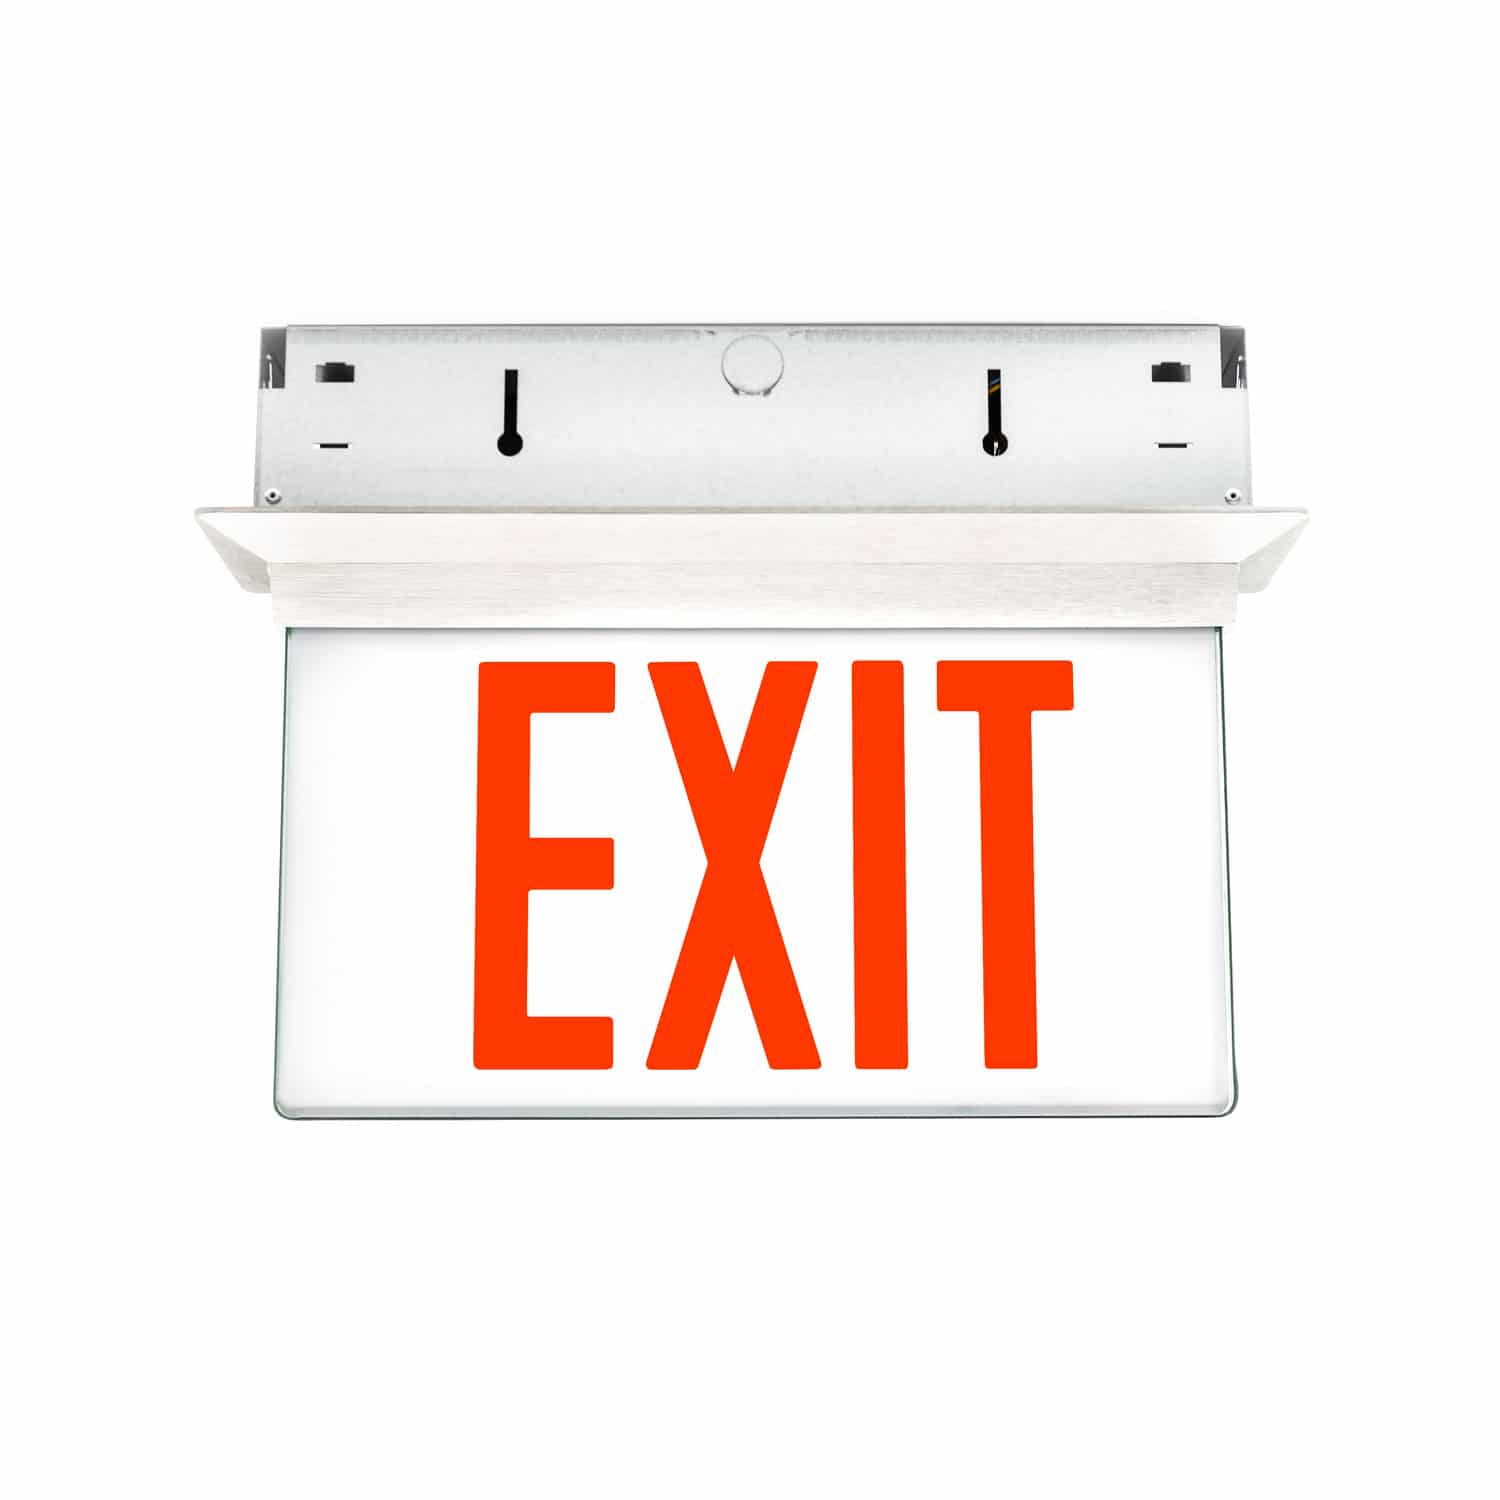 The ELT Elite Edge-Lit Exit Sign has a Type IC Rated low profile recessed housing unit.